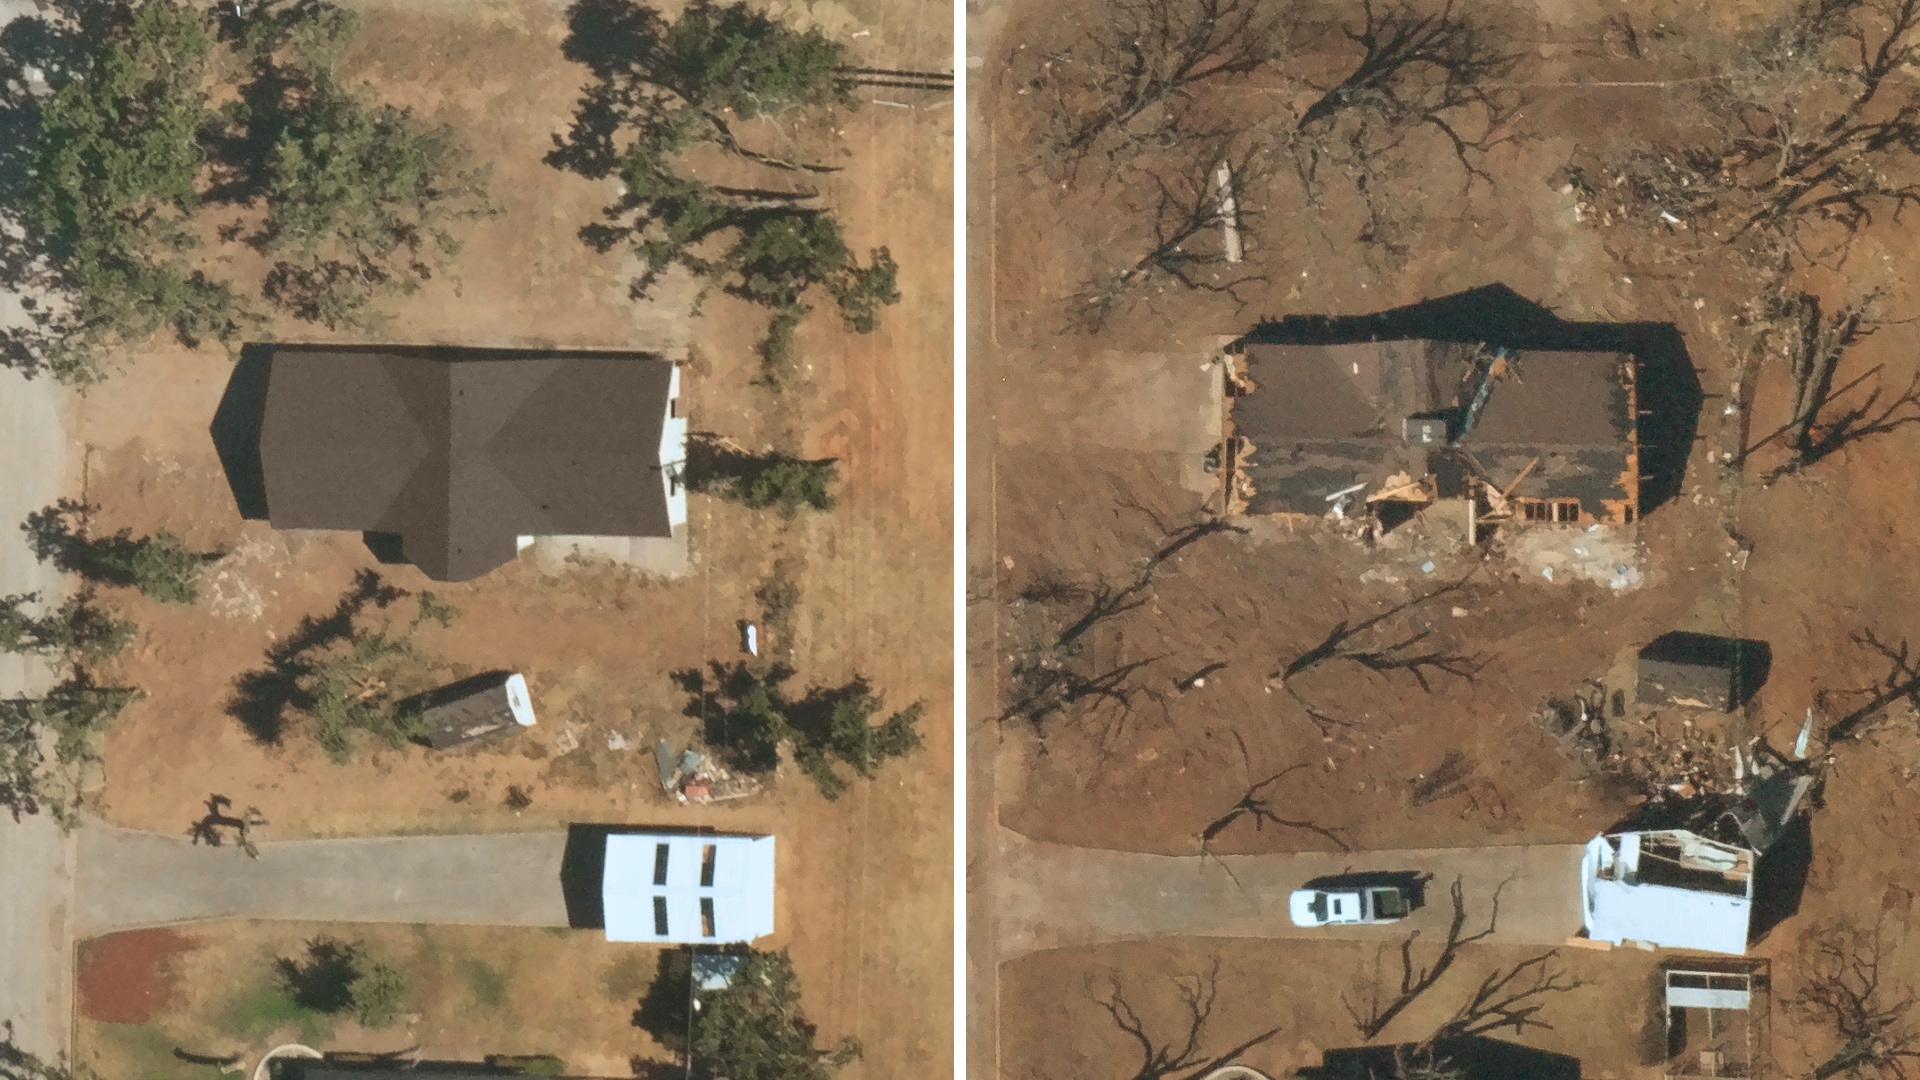 Near Space Labs' pre-catastrophe (left) and post-catastrophe (right) imagery, showing a residential property with no damage and then heavy damages, respectively. 